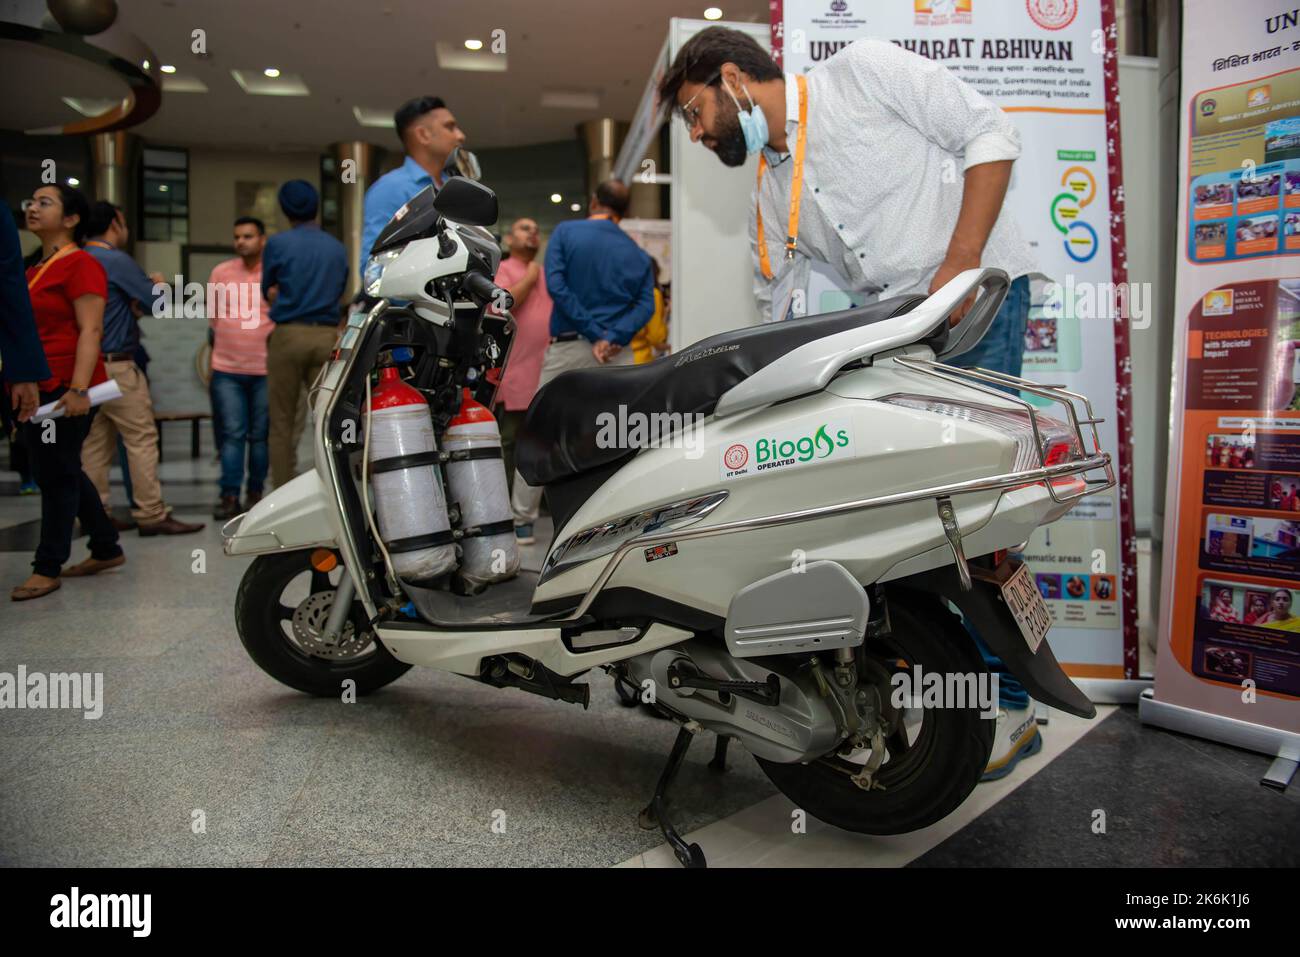 Delhi, India. 14th Oct, 2022. Student of Indian Institute of Technology Delhi showcasing Biogas fuelled scooter during inaugural day of IInvenTiv 2022, the first ever all IITs (indian institute of technology) research and development Showcase at the Indian Institute of Technology. IInvenTiv 2022 is an R&D (research and development) Fair organised under the supervision of a Steering Committee headed by Dr. Pawan Goenka, Chairman, BoG (Board of Governors) IIT and the event marks the coming together of all the 23 IITs under one umbrella to showcase their respective research and innovation experti Stock Photo